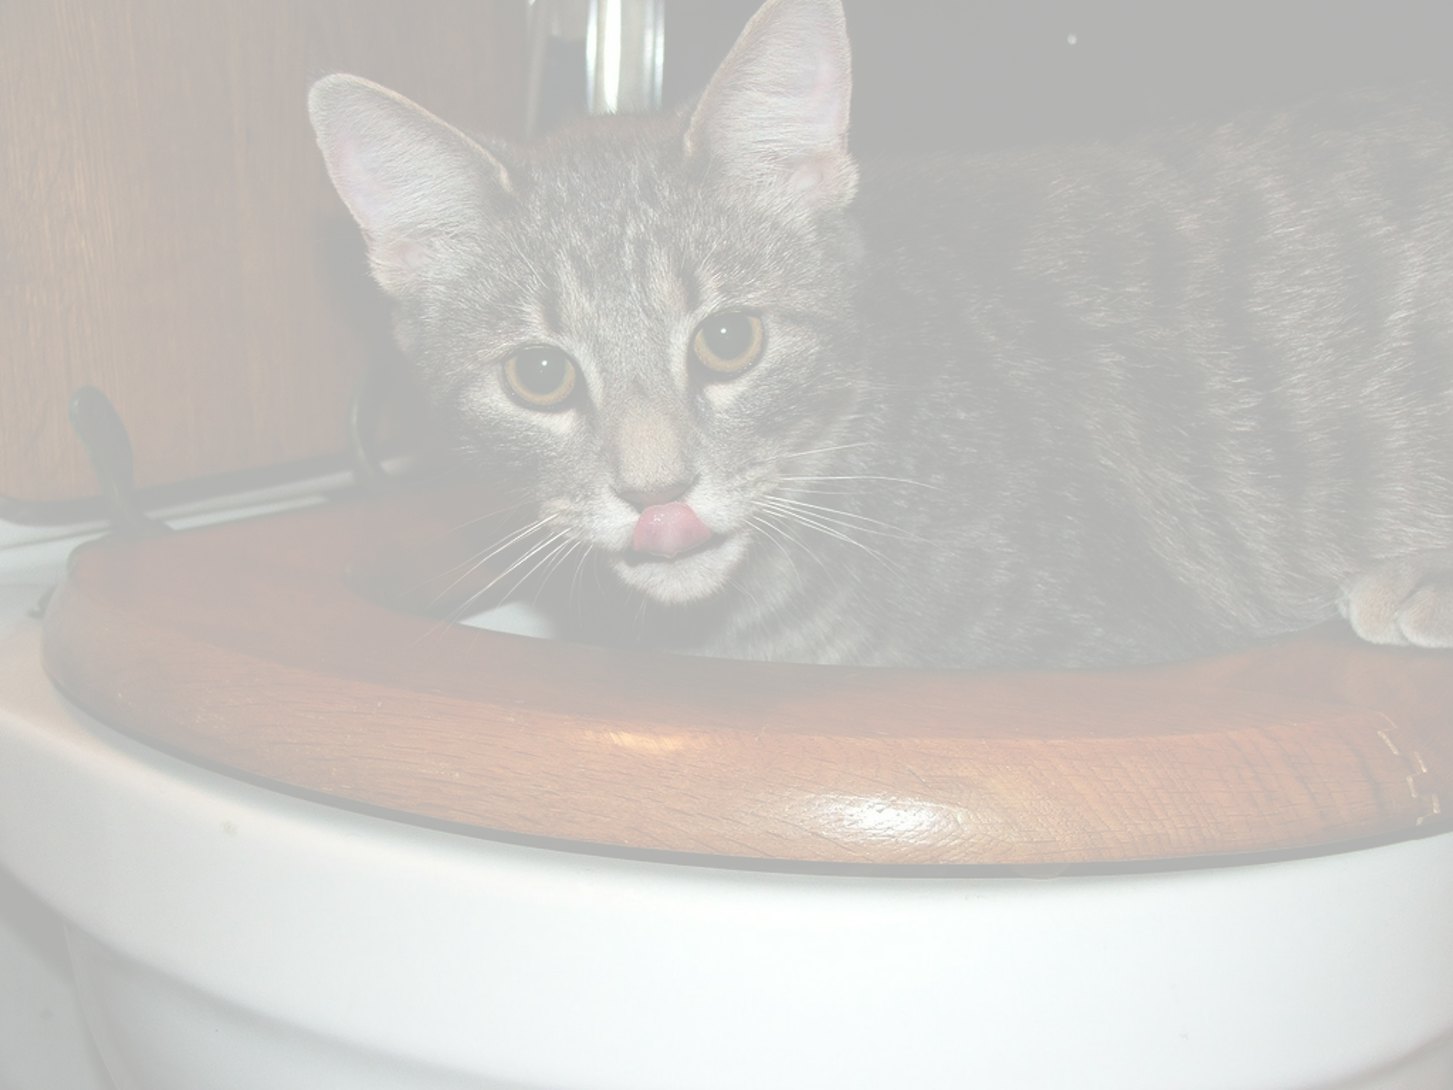 I Tried To Train My Cat To Poop In The Toilet And Lived To Regret It